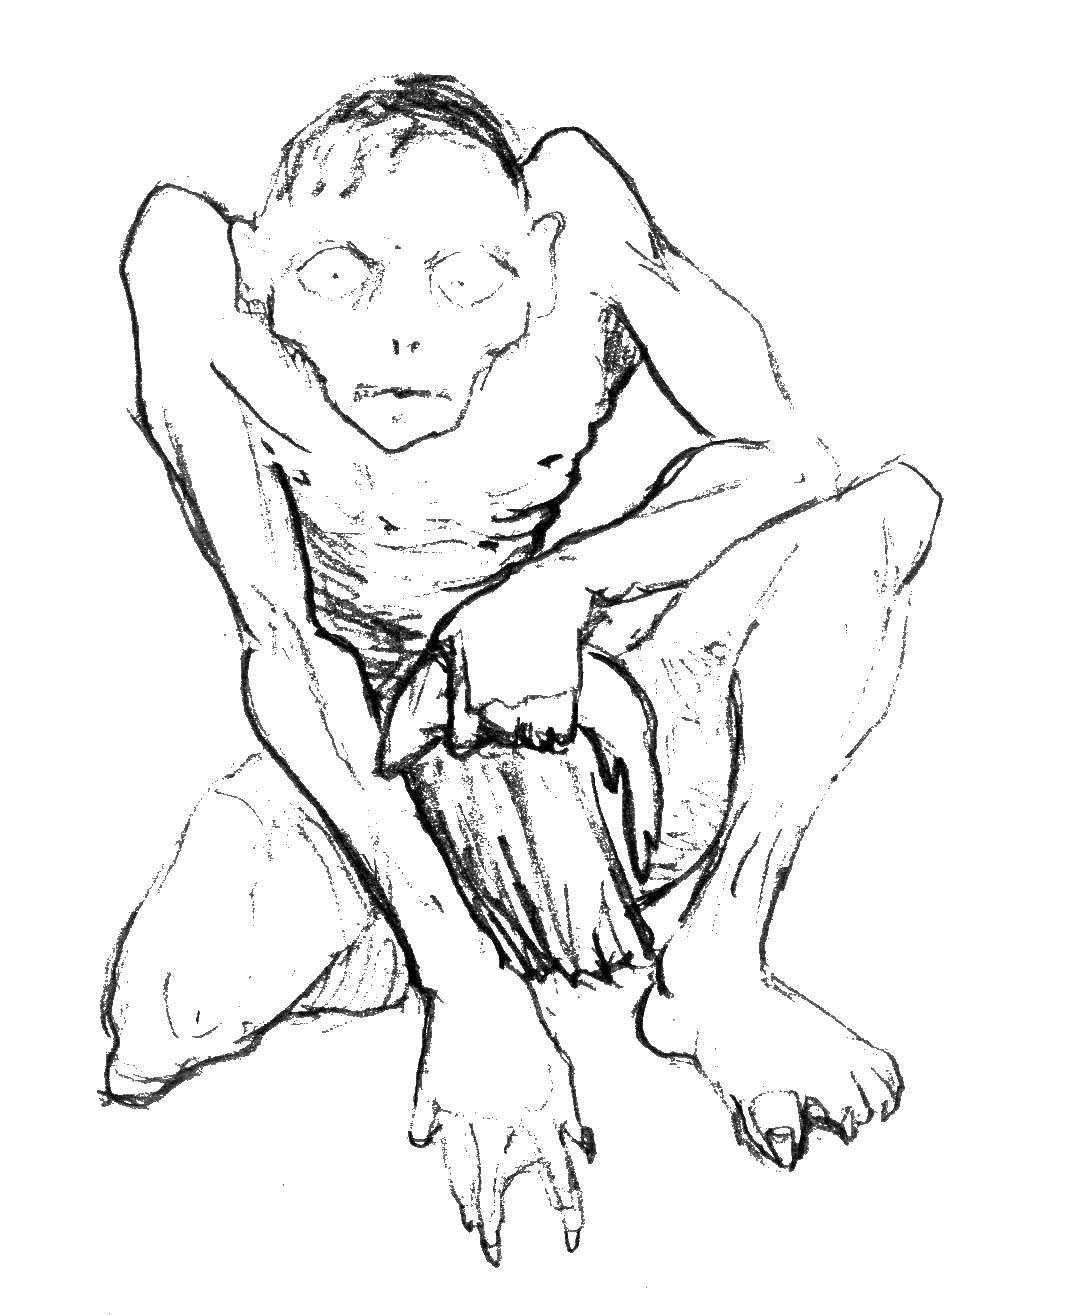 Coloring Gollum. Category Lord of the rings. Tags:  Gollum, Lord of the rings.